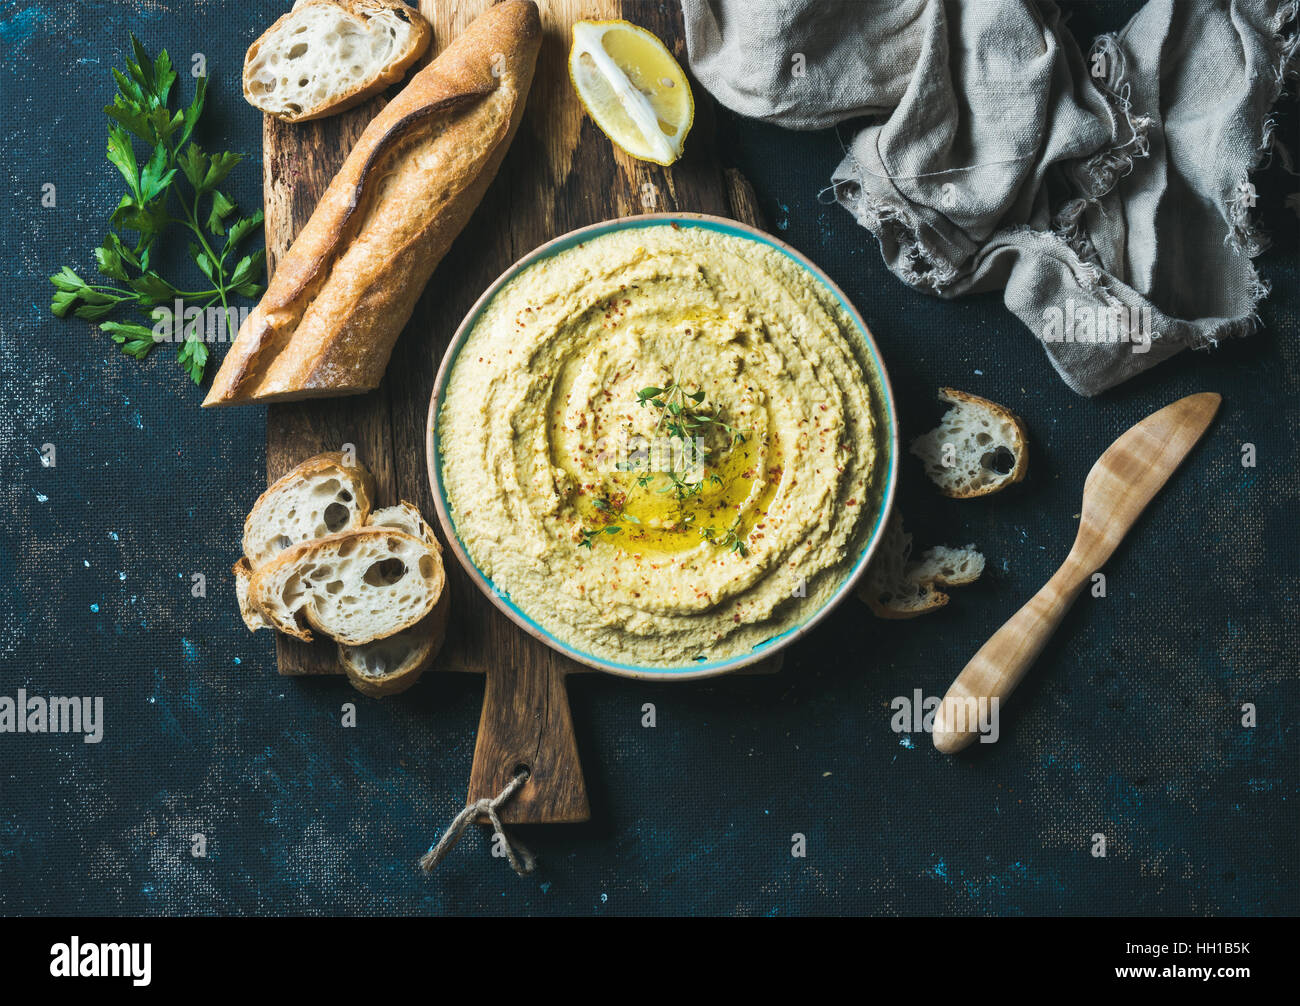 Homemade hummus with lemon, herbs and freshly baked baguette Stock Photo